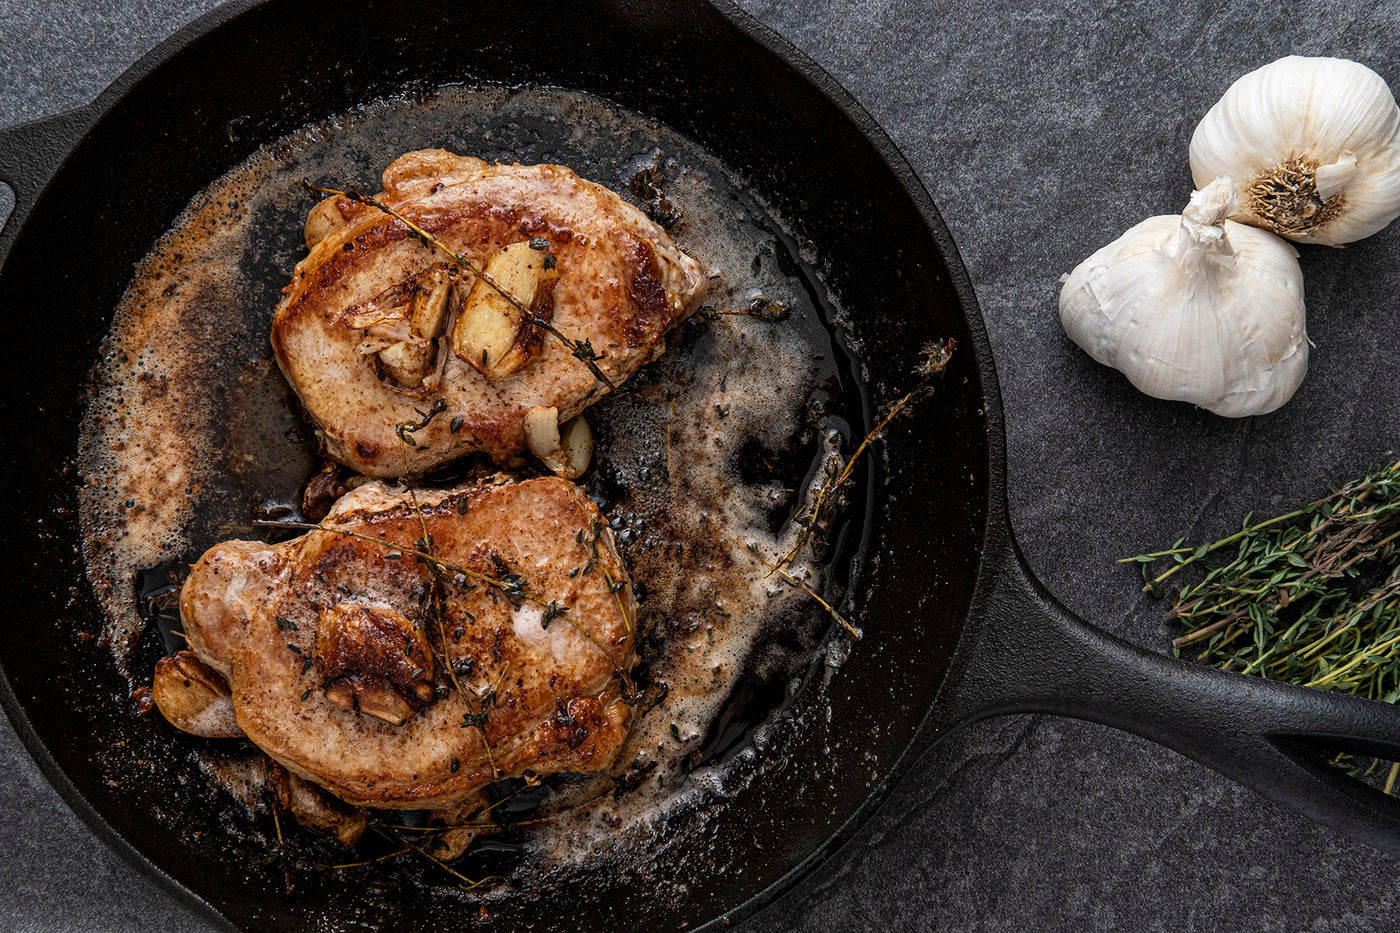 What vitamins and nutrients are in meat? Two thick cut boneless pork chops are shown cooked in a cast iron skillet with sauteed garlic cloves on top and fresh garlic on the counter near the pan.